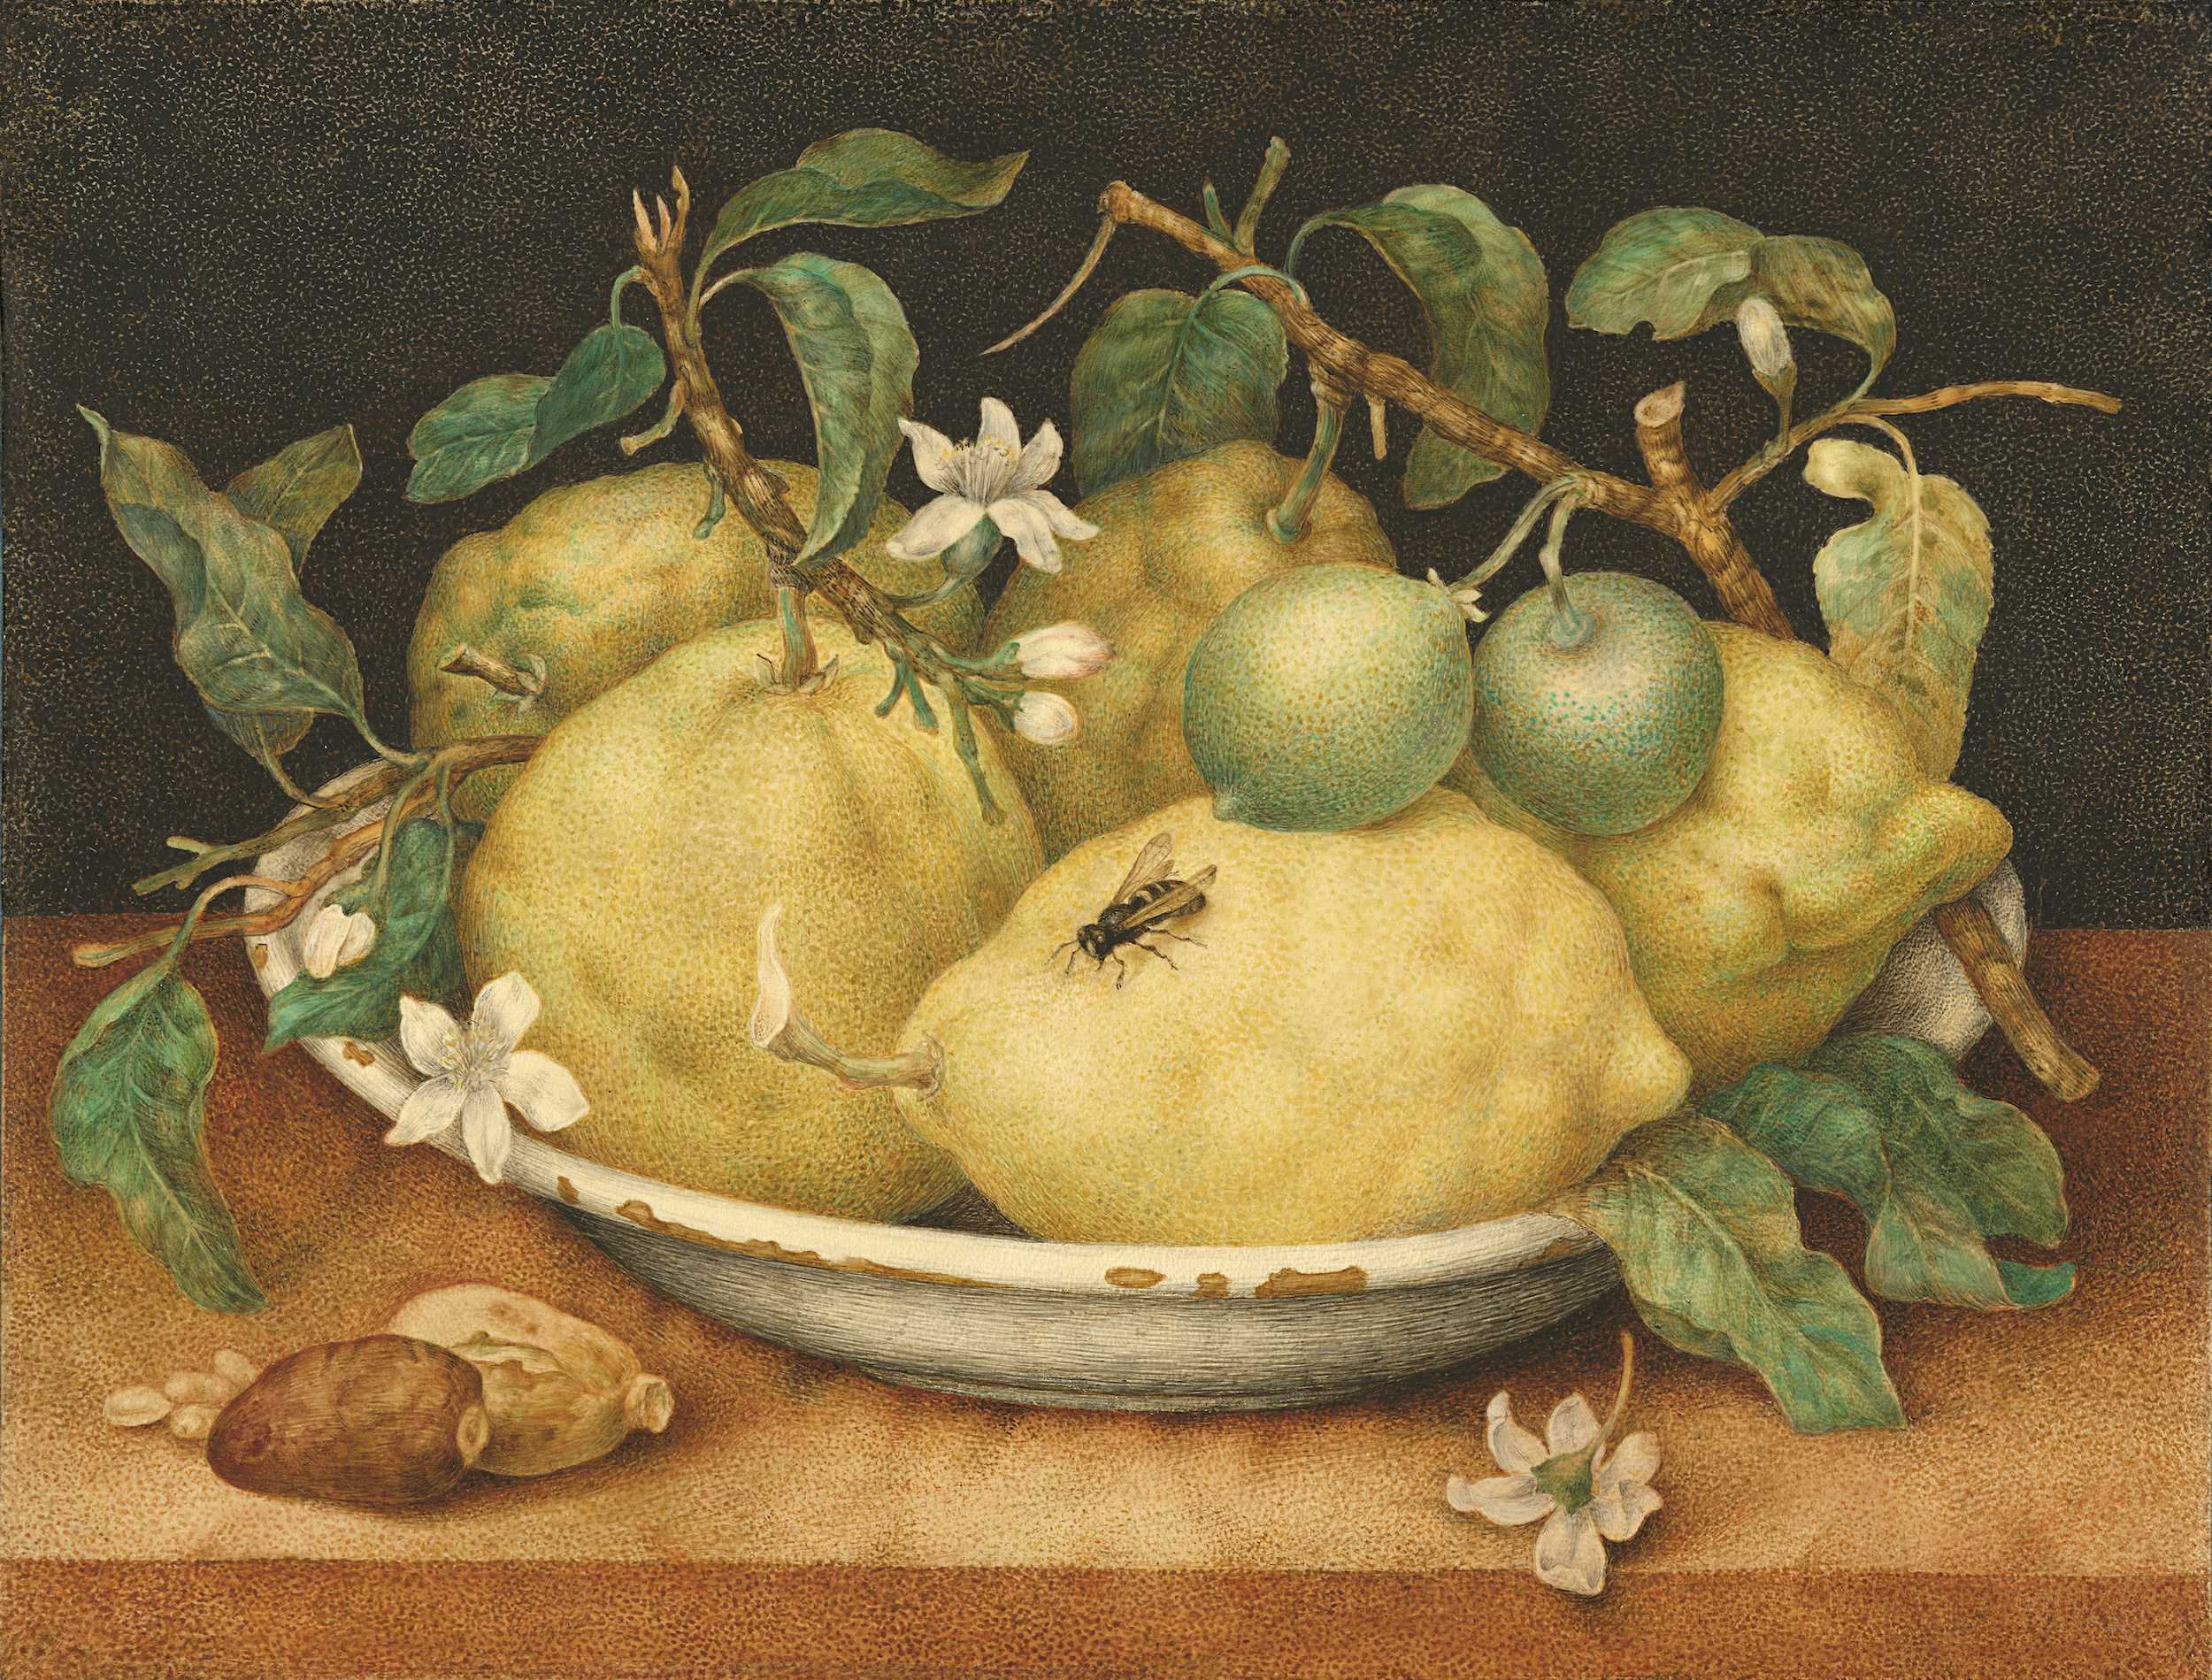 Still Life with Bowl of Citrons by Giovanna Garzoni - late 1640s - 10 7/8 × 14 in J. Paul Getty Museum